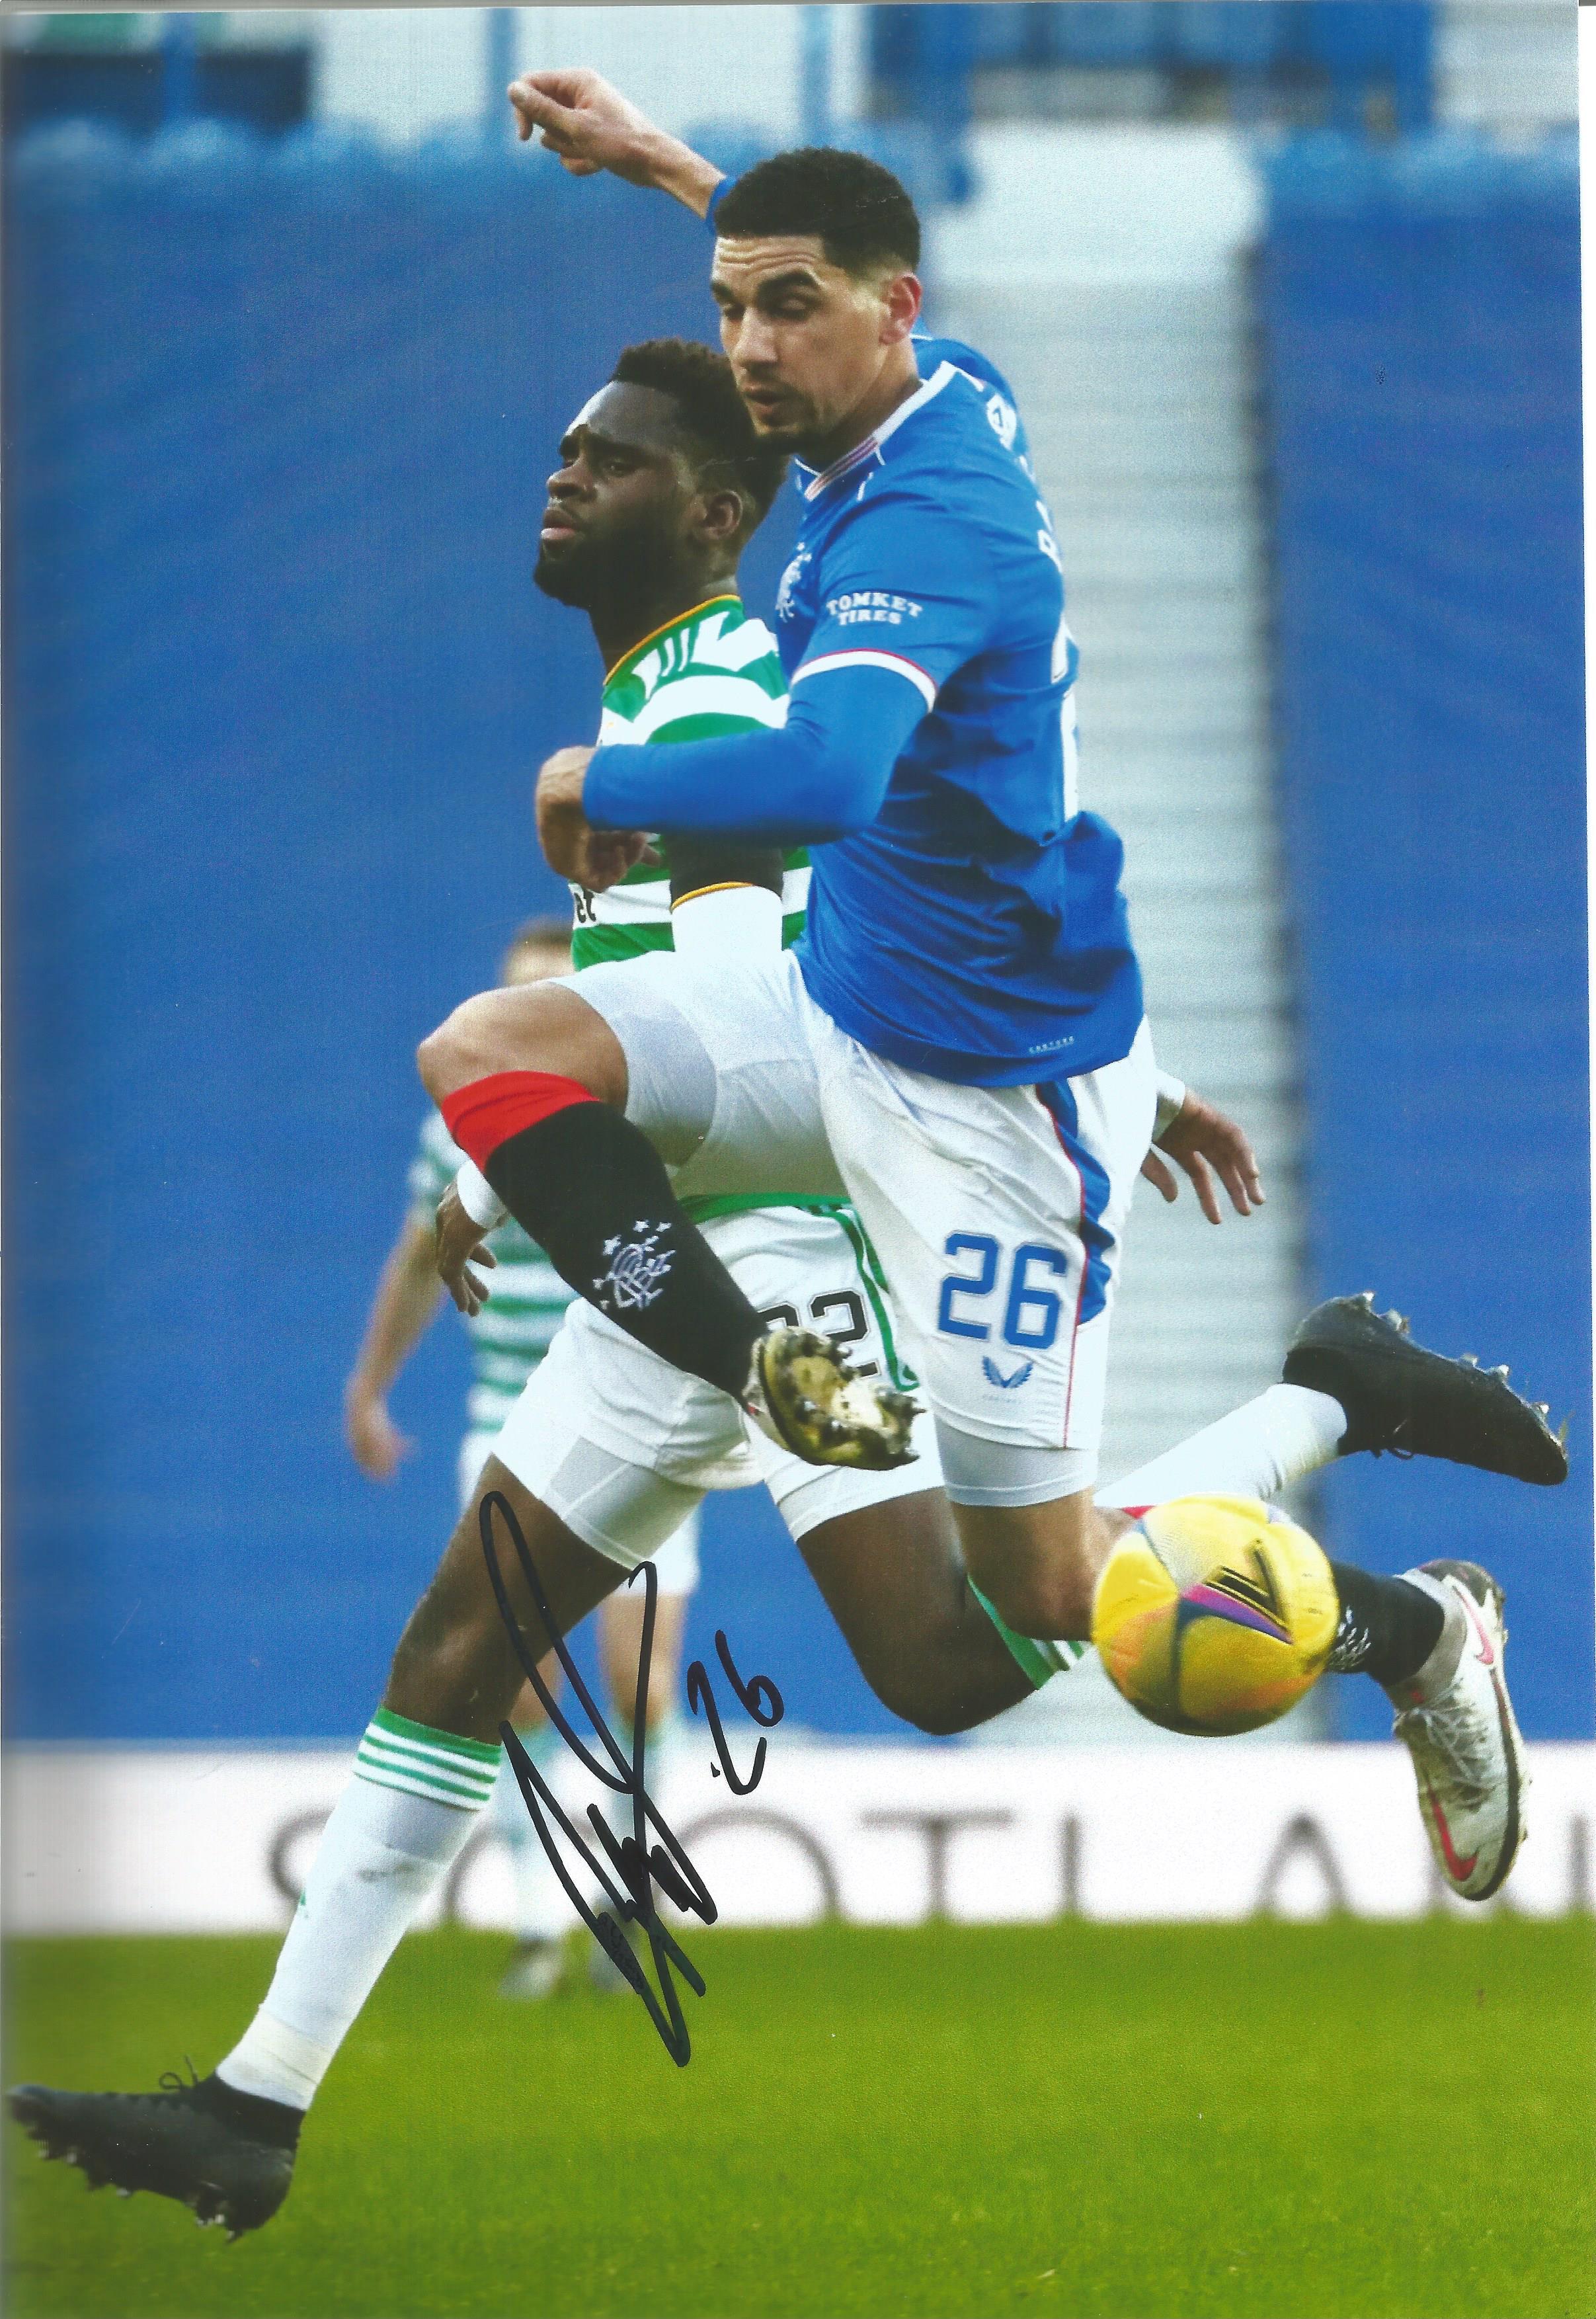 Football, Leon Balogun signed 12x8 colour photograph pictured in action playing for Rangers. Balogun - Image 2 of 2